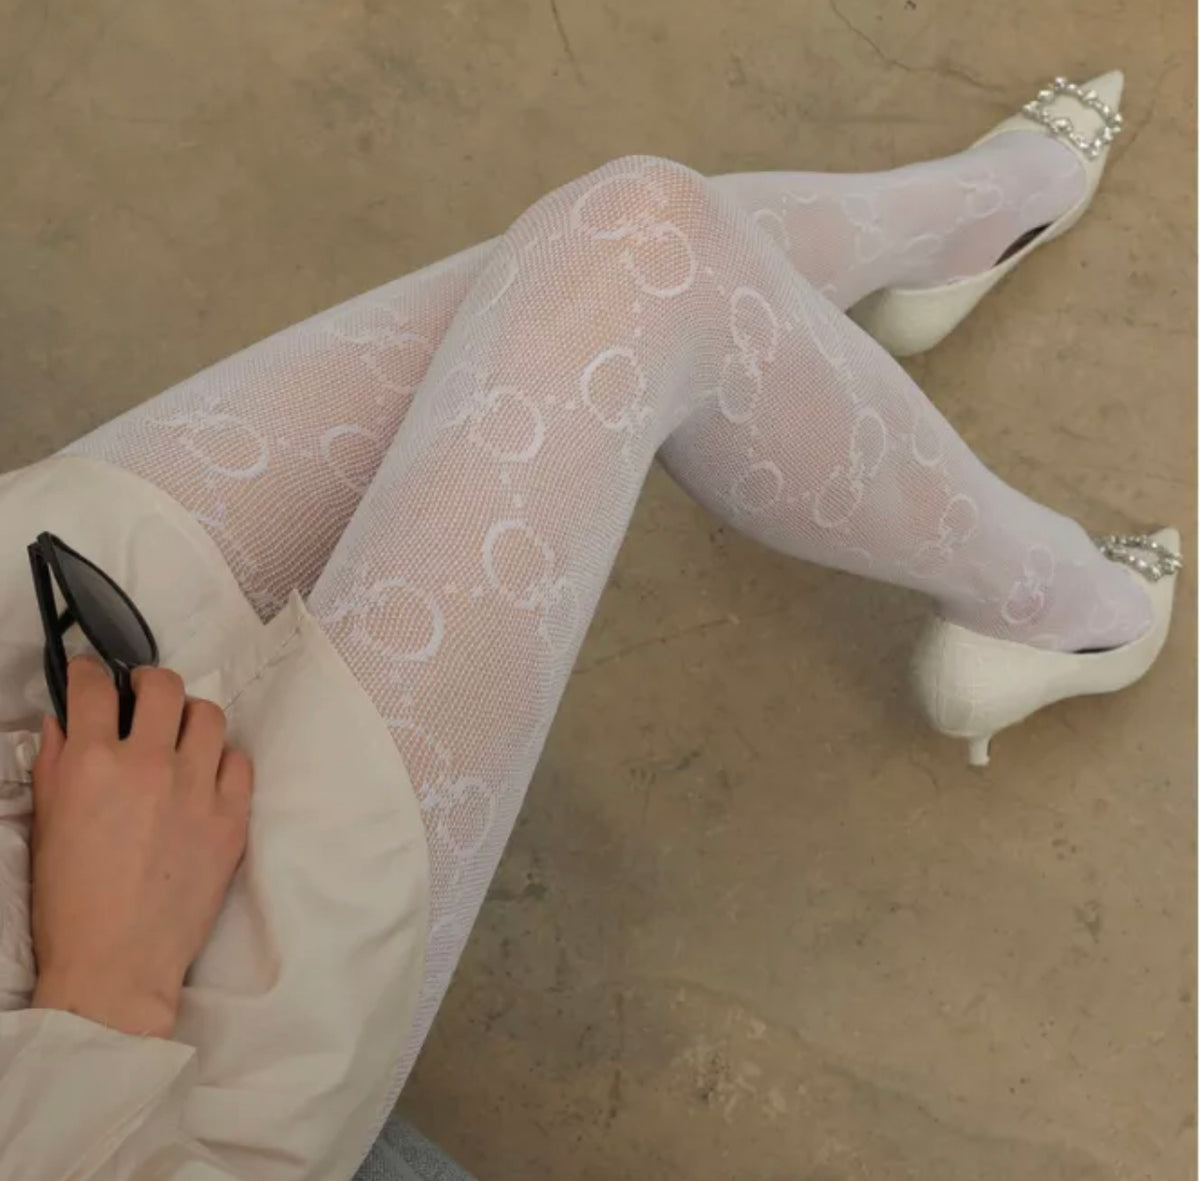 GG Logo Large Letter Tights Stockings